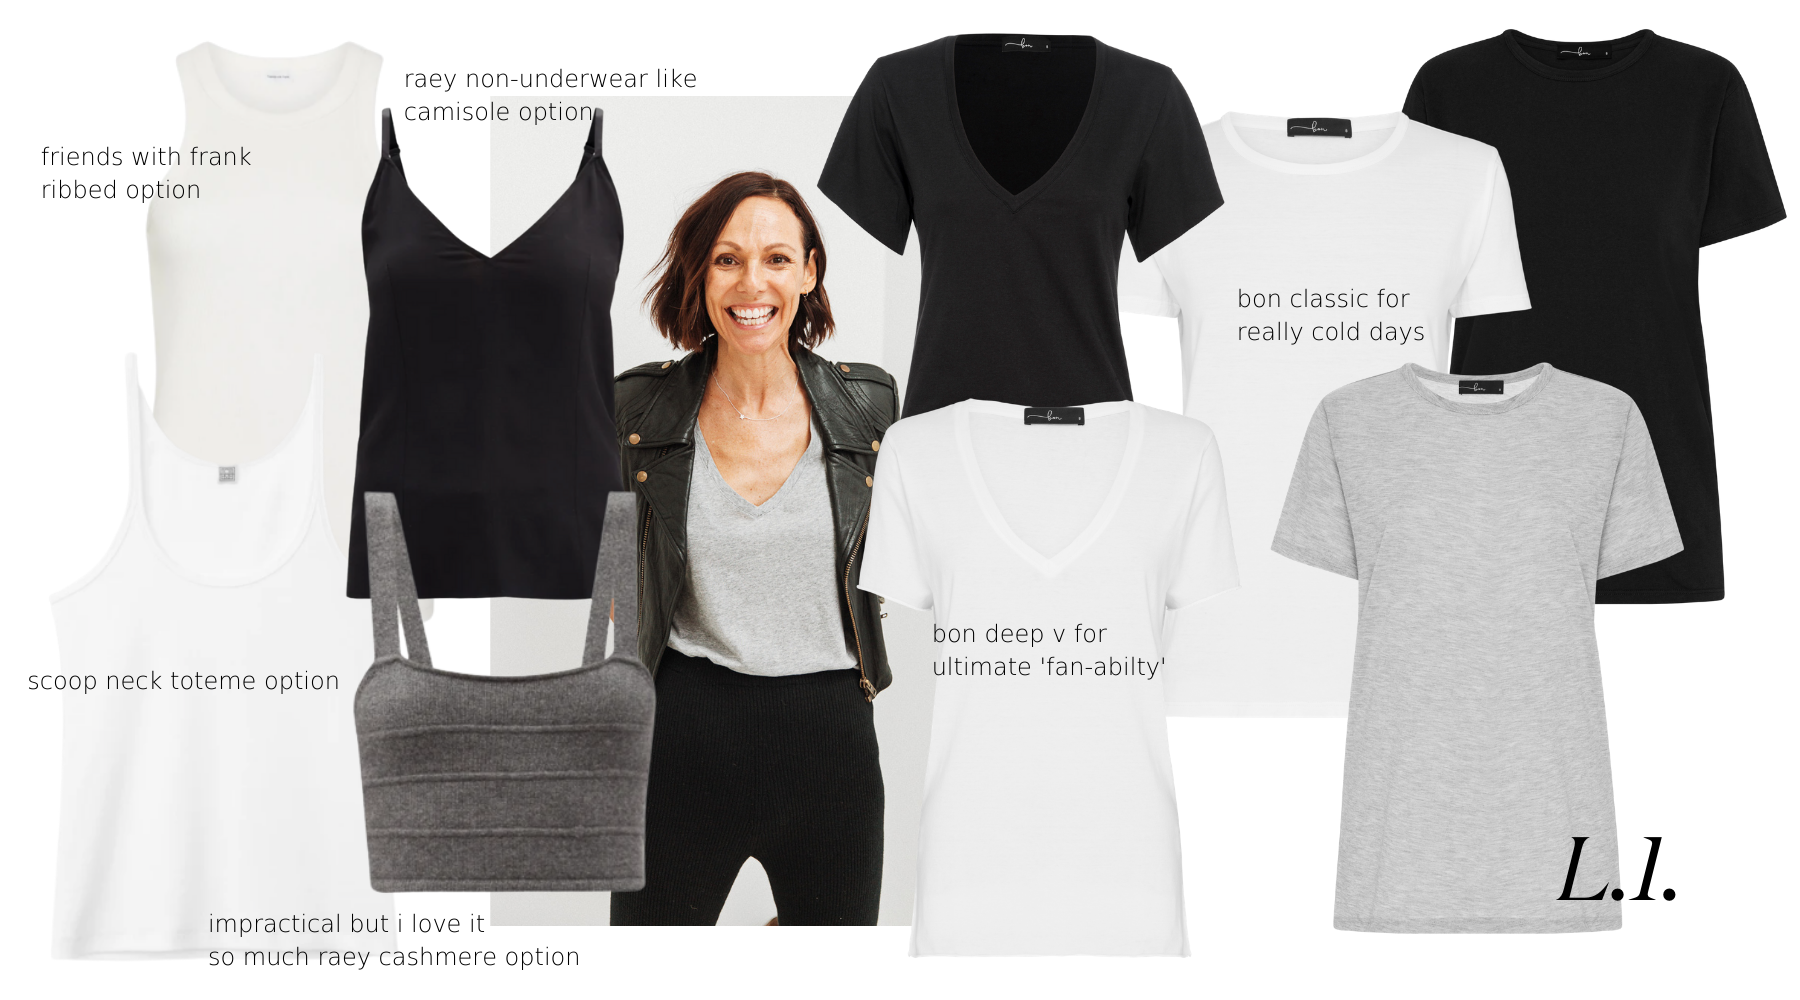 recommendations for layer 1 menopause dressing. bon deep v and classic tees, reformation, raey and toteme tanks